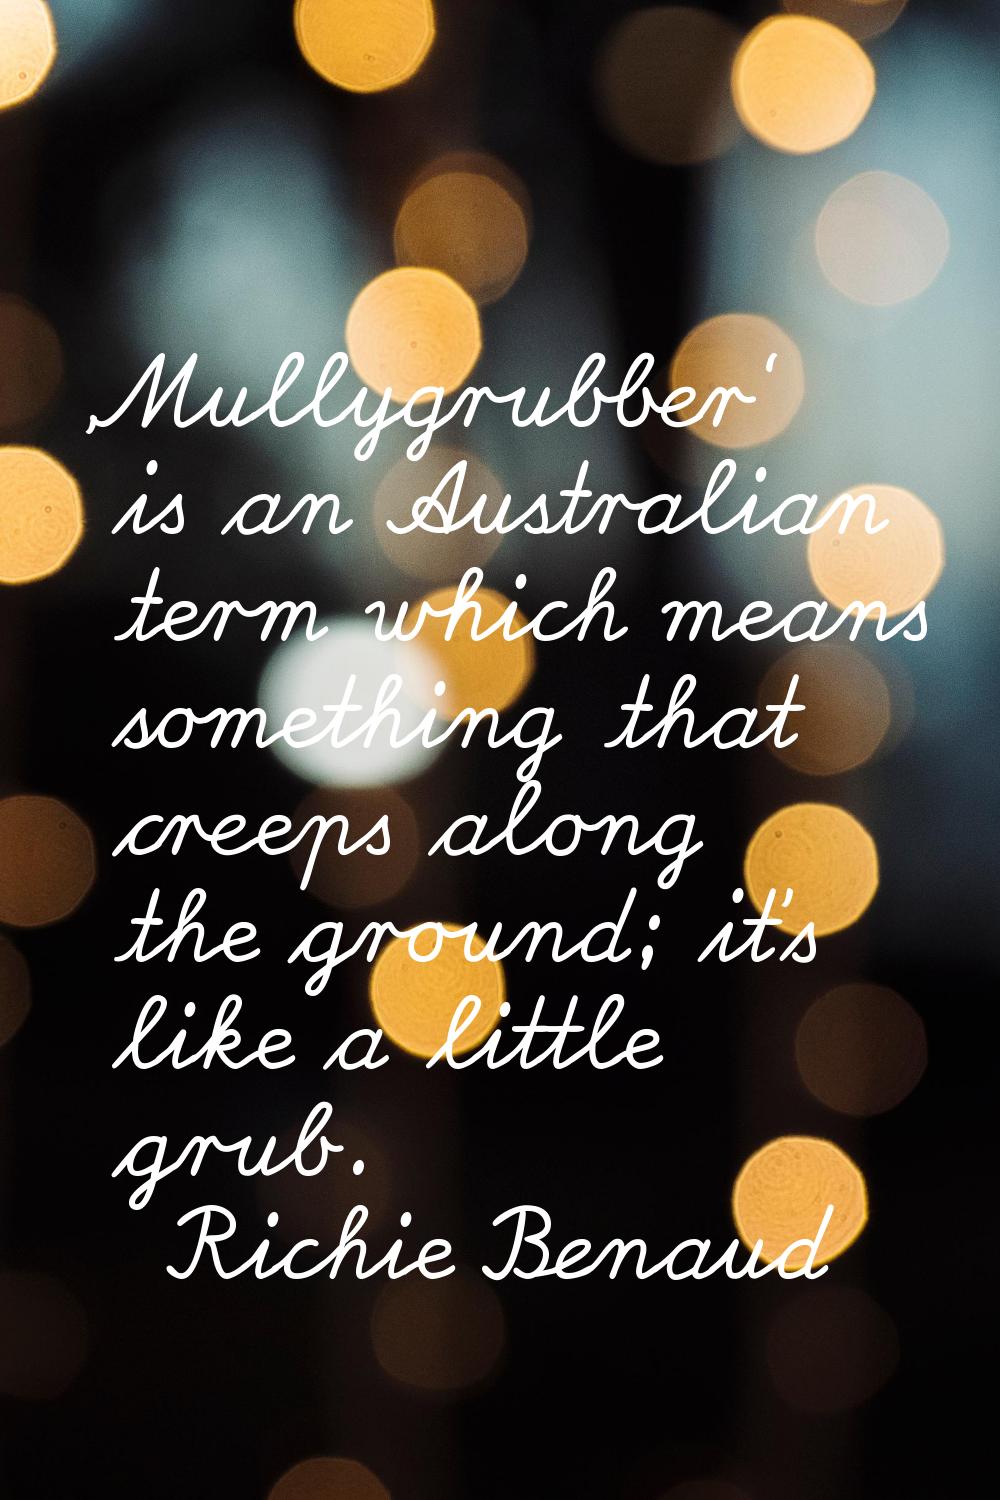 'Mullygrubber' is an Australian term which means something that creeps along the ground; it's like 